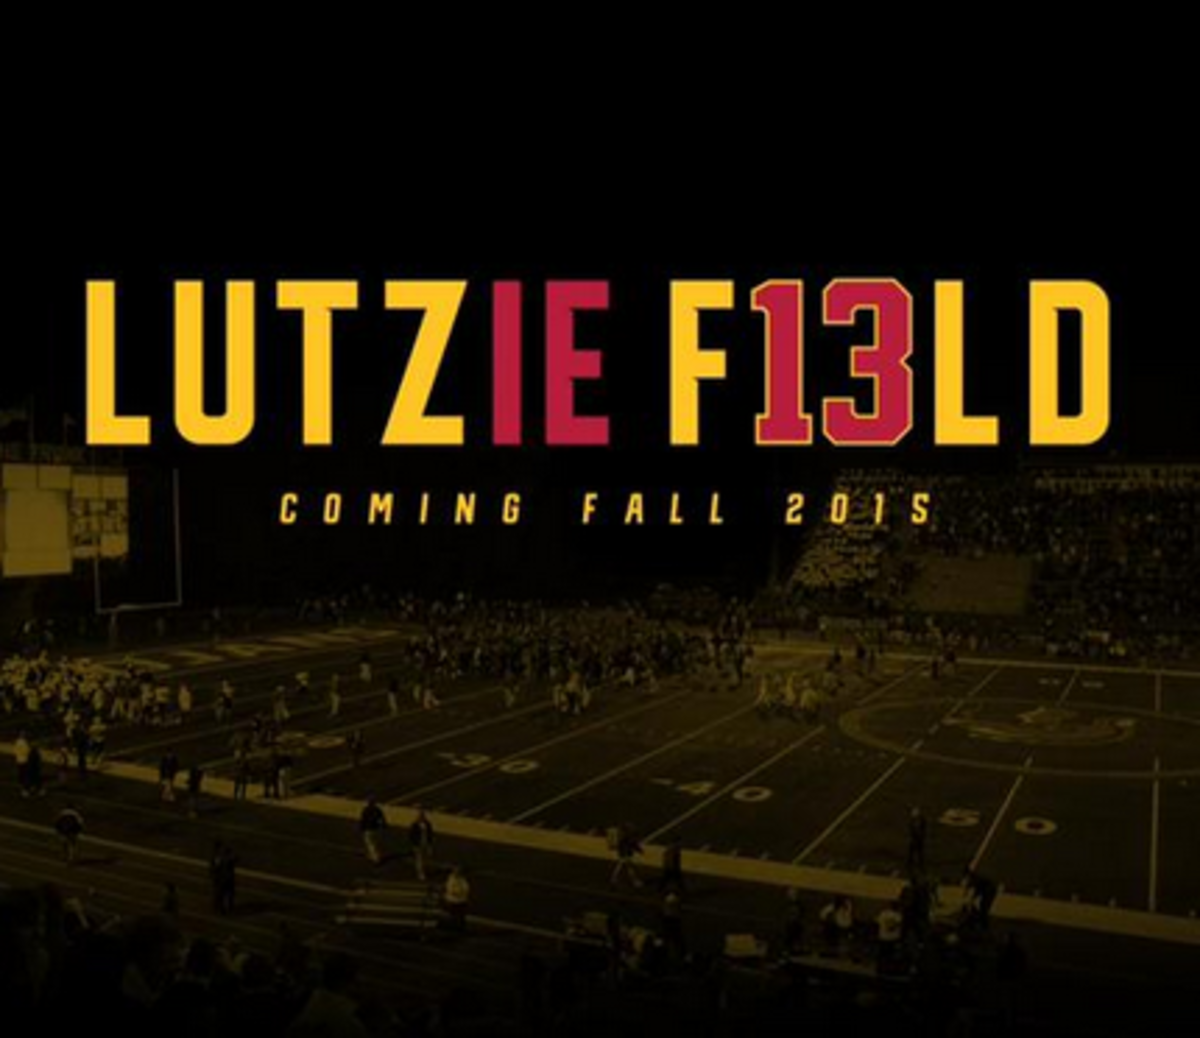 Phil Lutzenkirchen Field is coming in the fall of 2015.